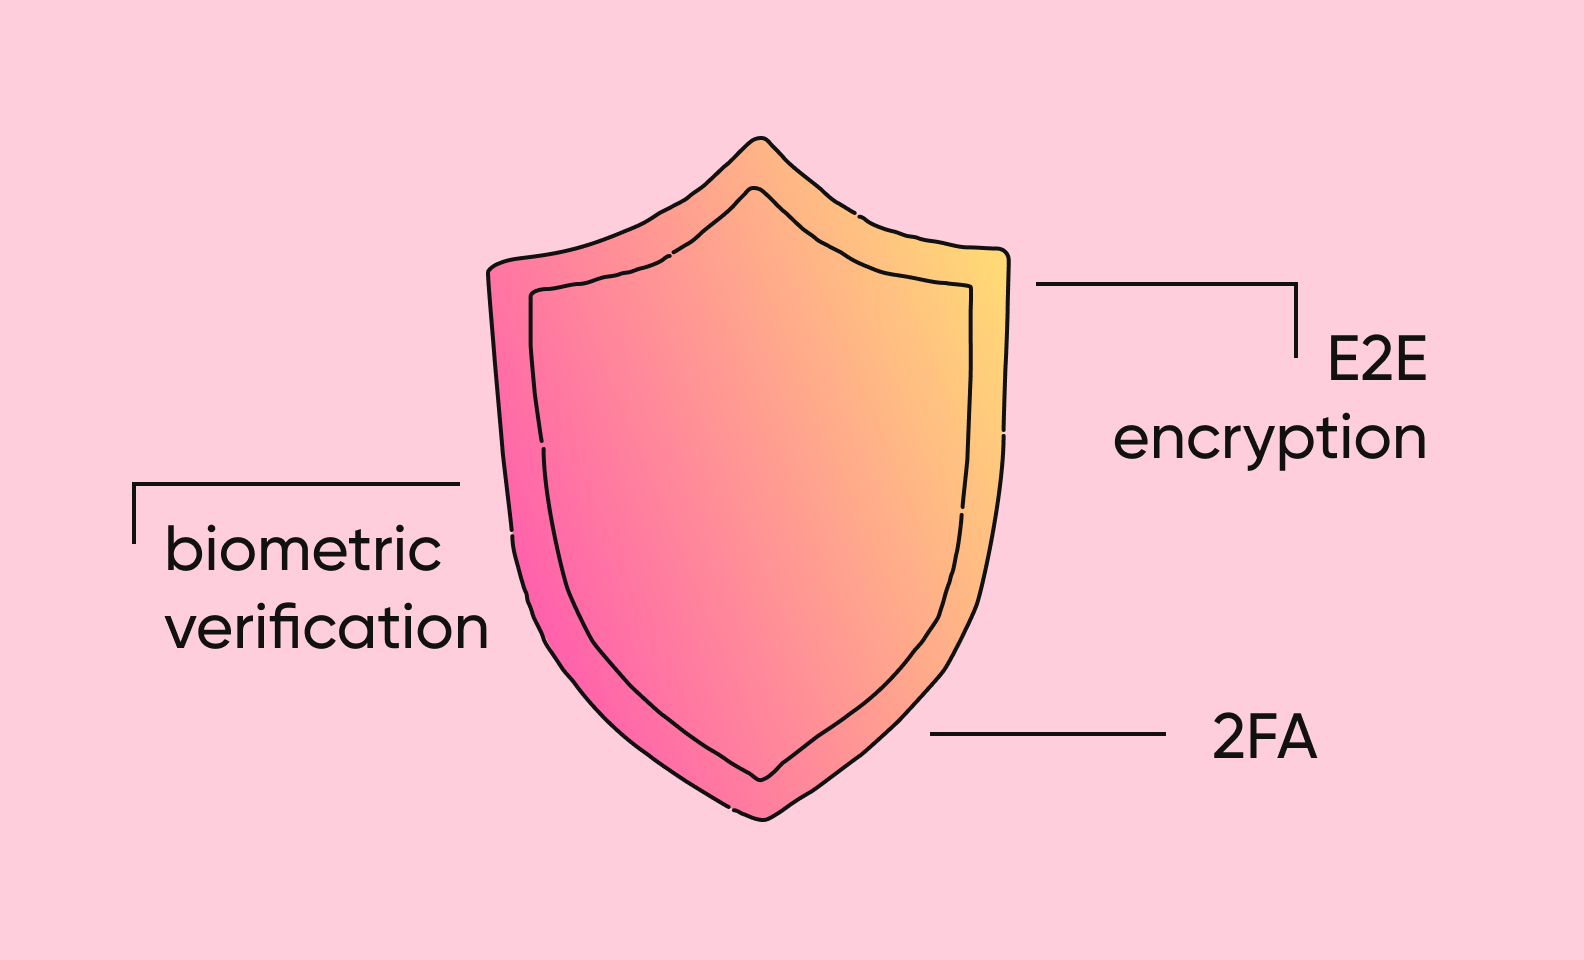 A picture showing the three crucial components of mobile security: E2E encryption, 2FA, and biometric verification